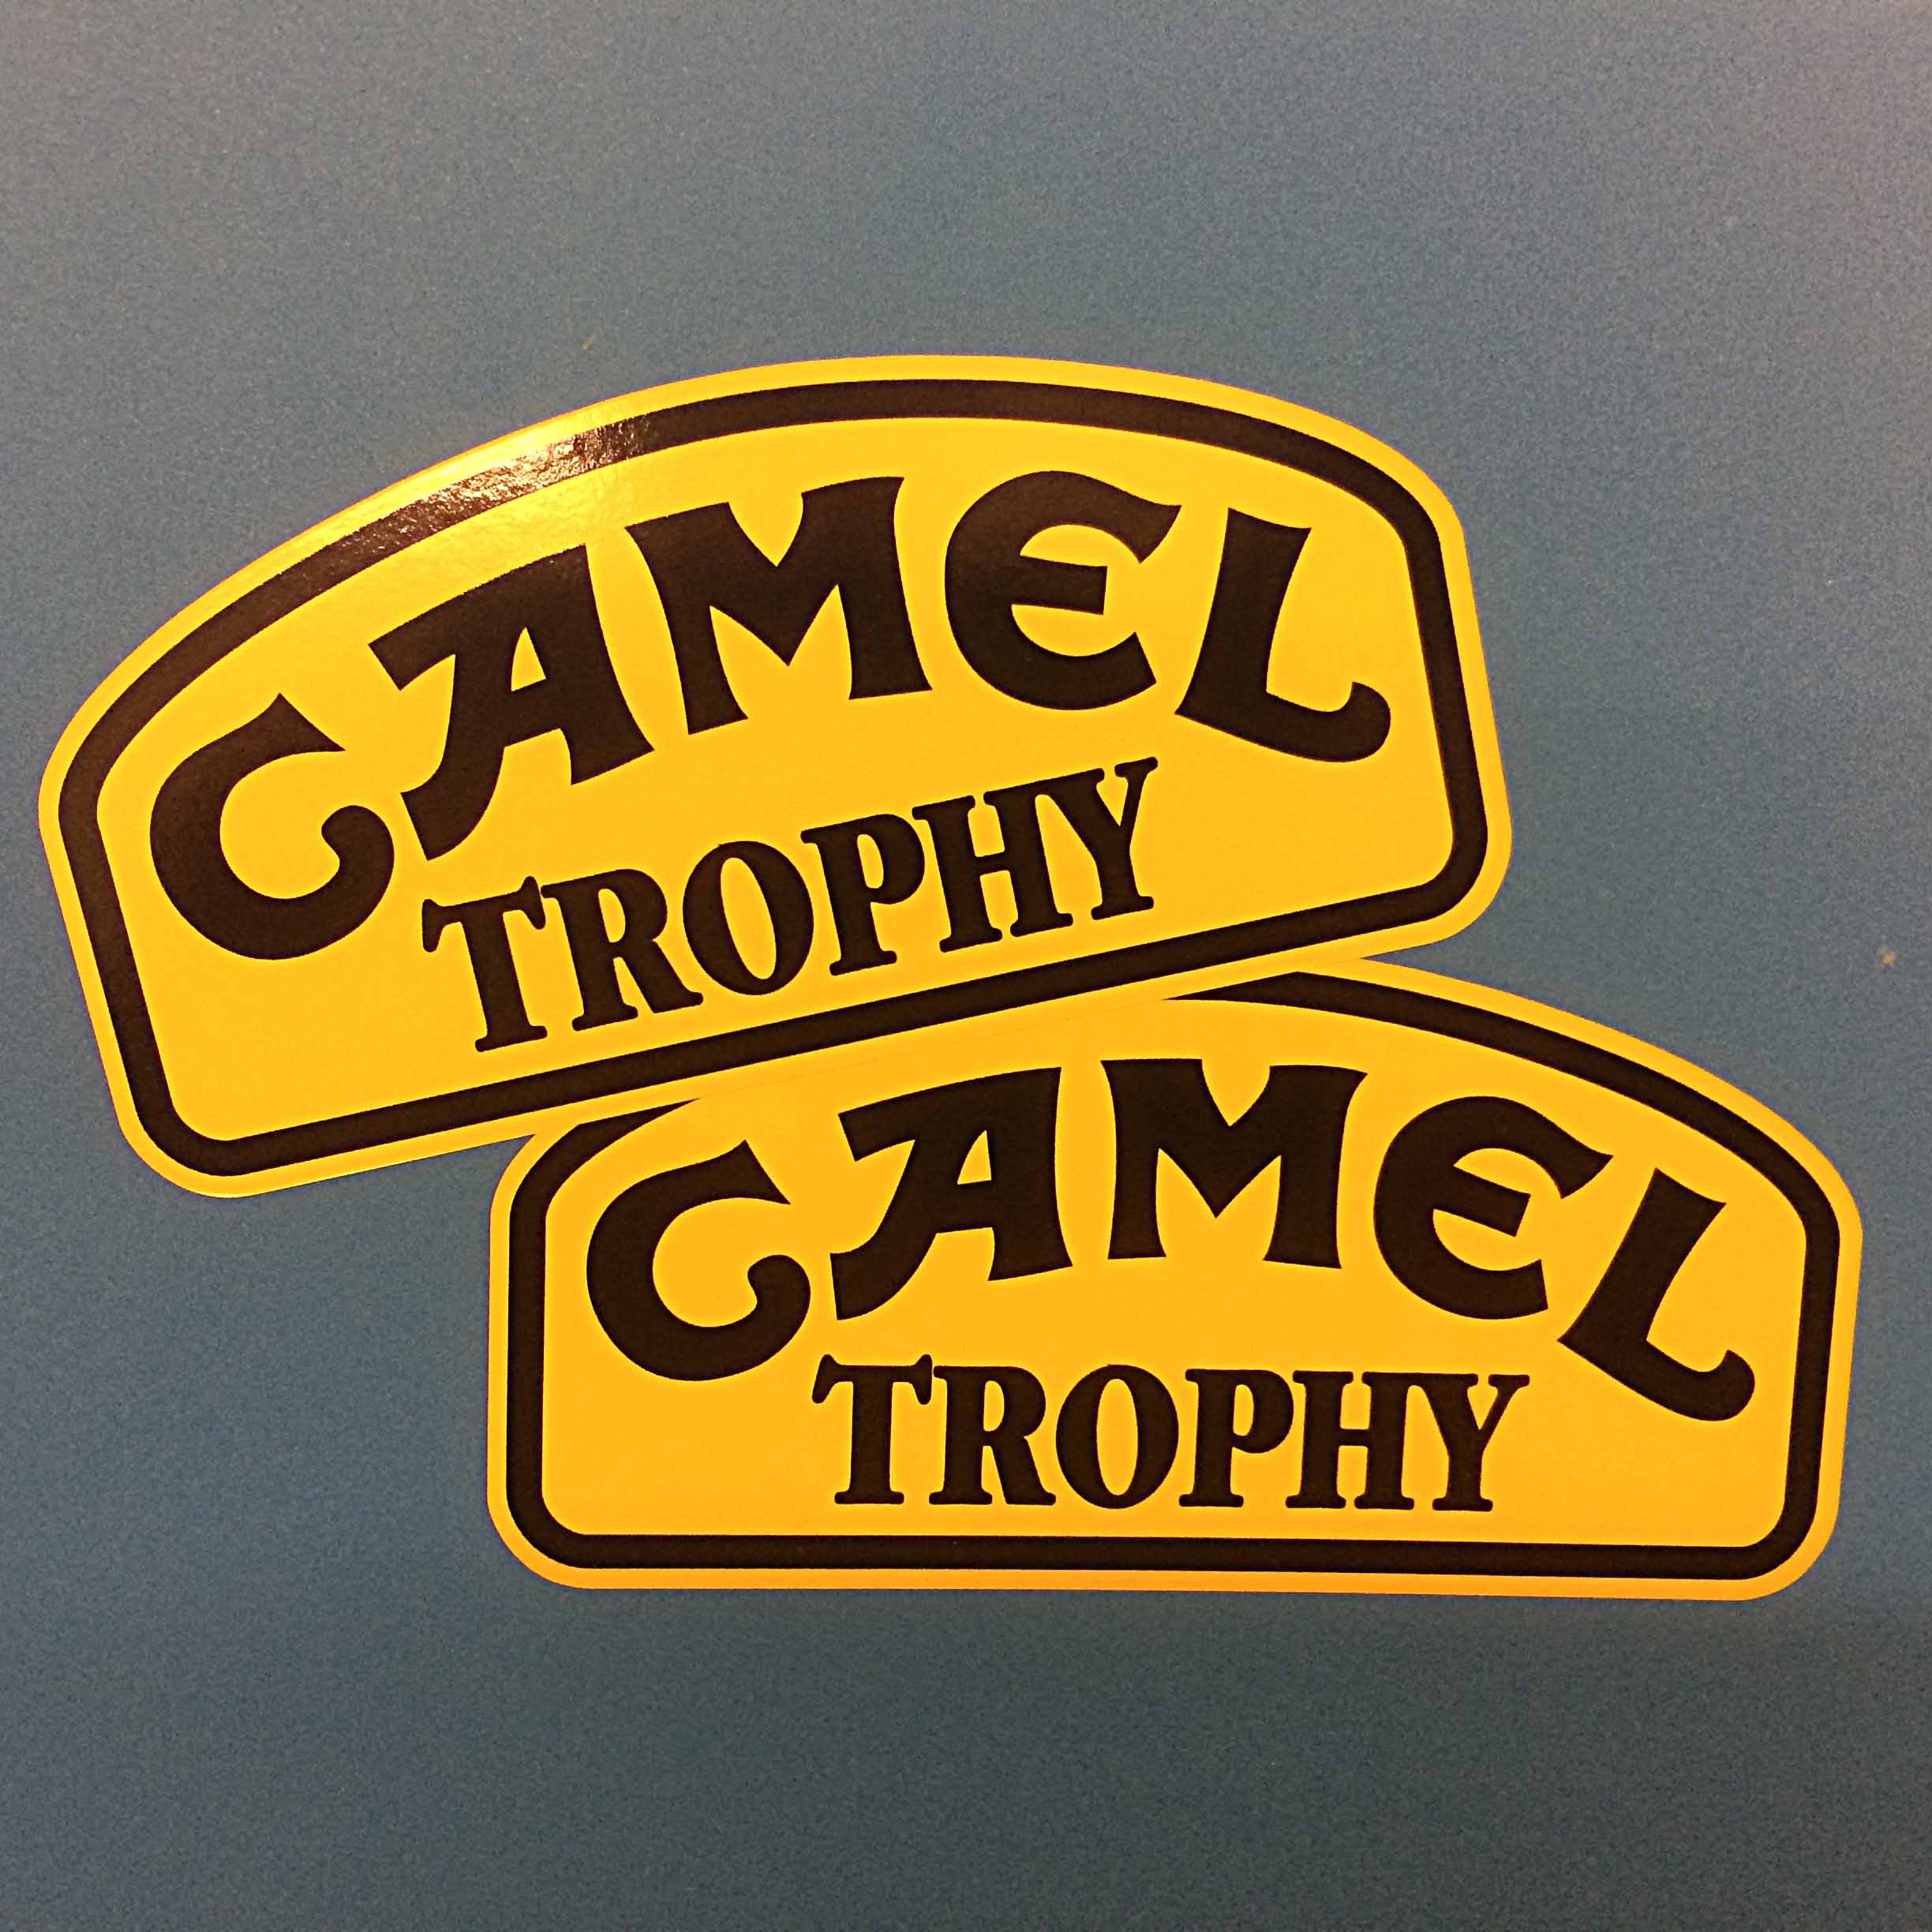 CAMEL TROPHY STICKERS. Camel Trophy in black uppercase lettering on a yellow sticker with a black border. The top edge of the sticker is curved.